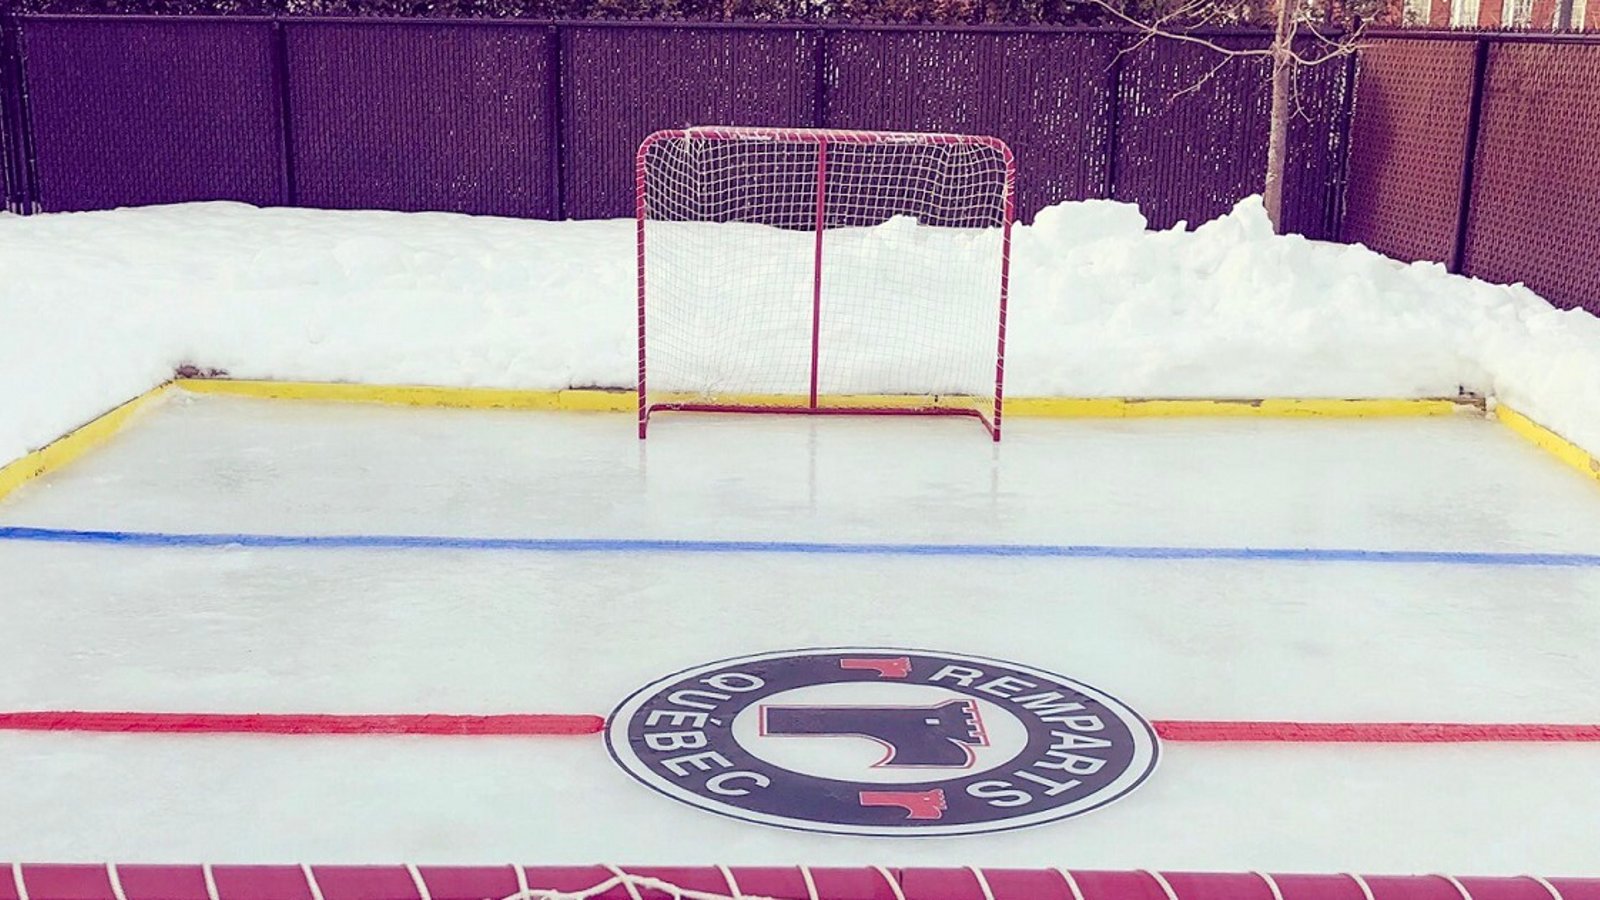 A look at some of this winter's best outdoor rinks(Part 1).